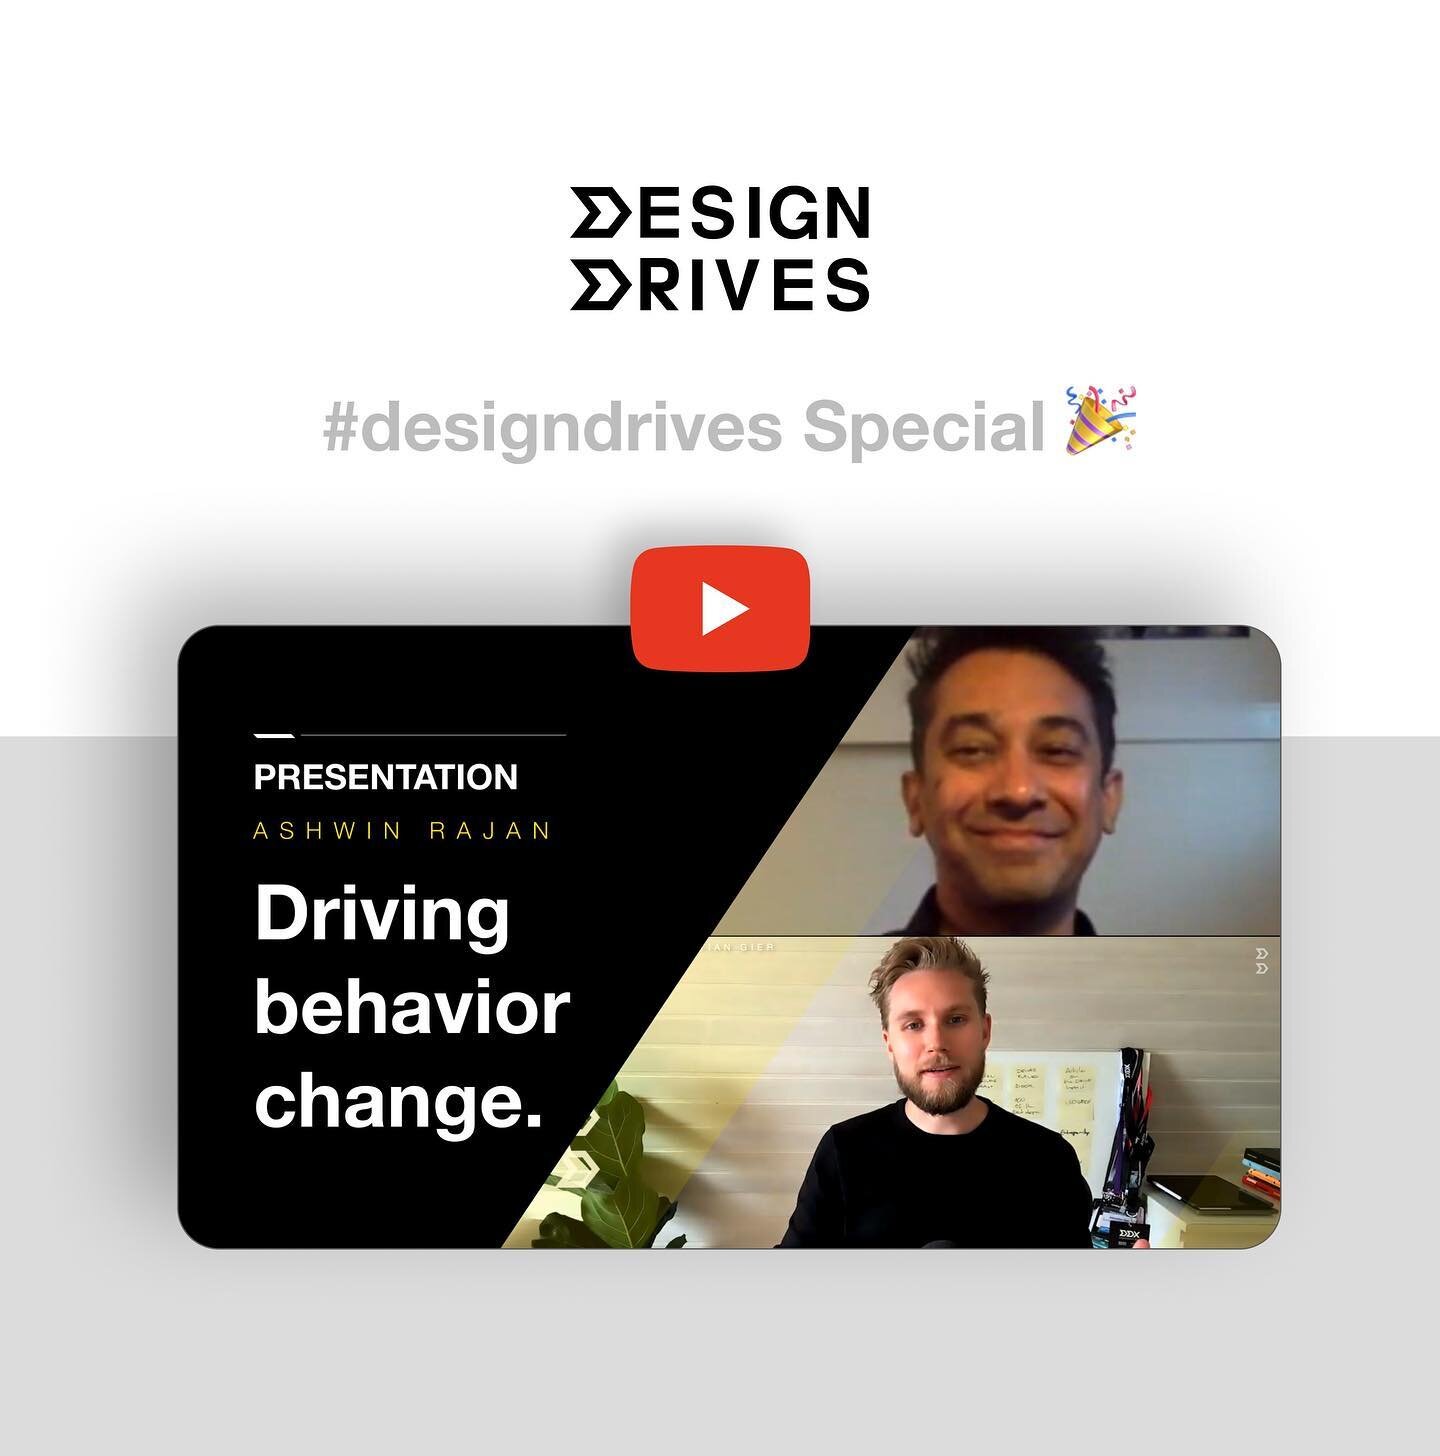 One year ago we had the chance to talk to Ashwin Rajan about Driving behavior change.

Now you can stream it on Youtube.🔥

Stay tuned in we will be back with a new episode soon!

#design #beaviordesign #youtube